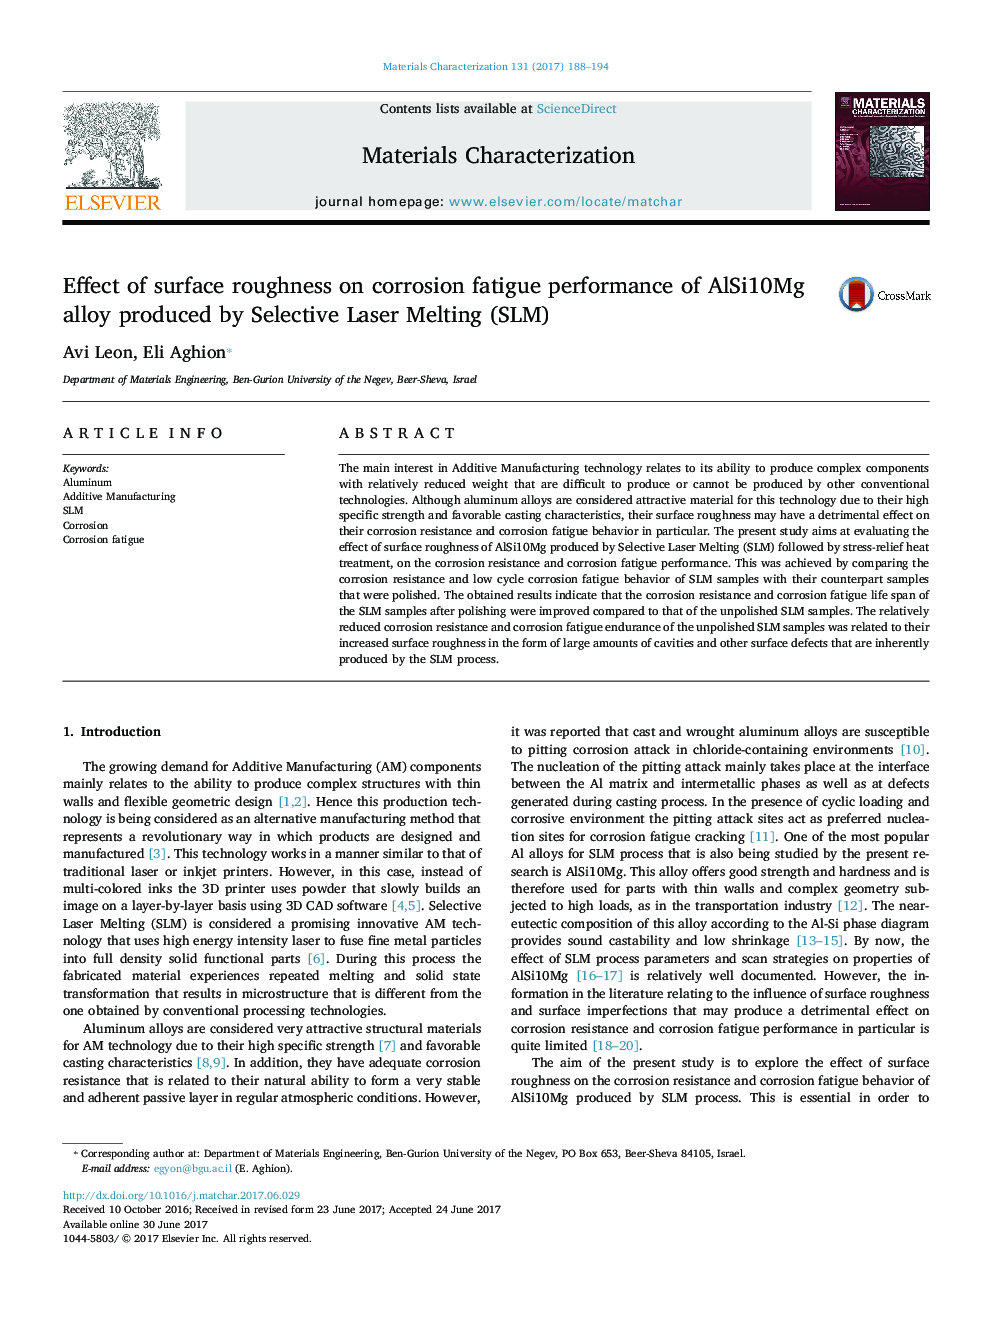 Effect of surface roughness on corrosion fatigue performance of AlSi10Mg alloy produced by Selective Laser Melting (SLM)